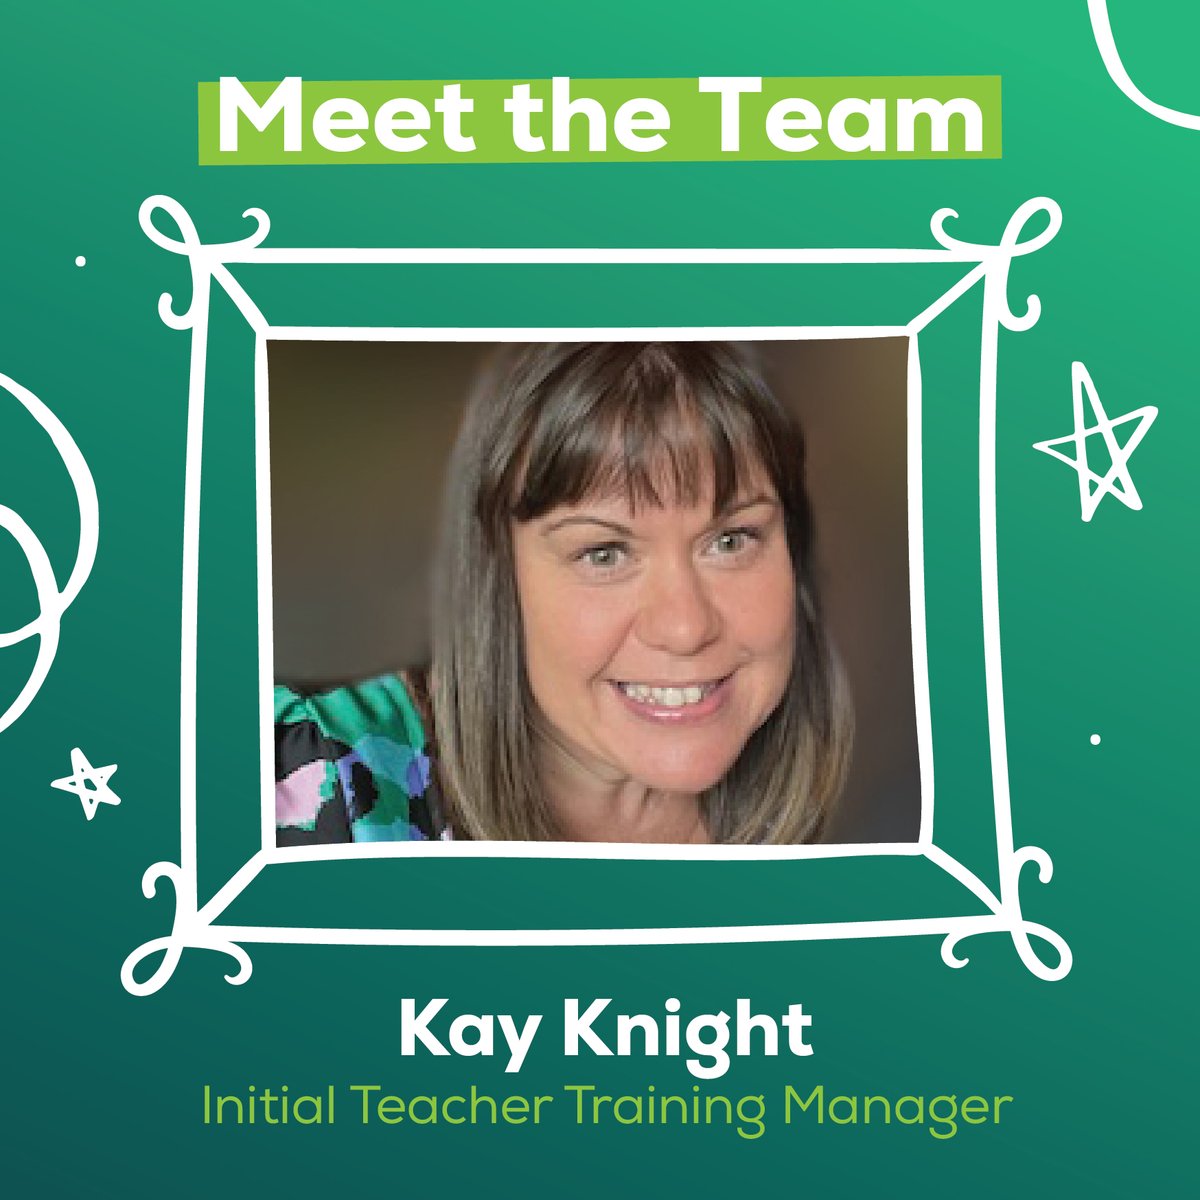 Say hello to Kay 👋 Initial Teacher Training Manager Kay is the welcoming face of North East SCITT, and will likely be your first point of contact. Kay ensures a seamless journey throughout your training year, supporting you from your initial enquiry to your graduation 🎓💚